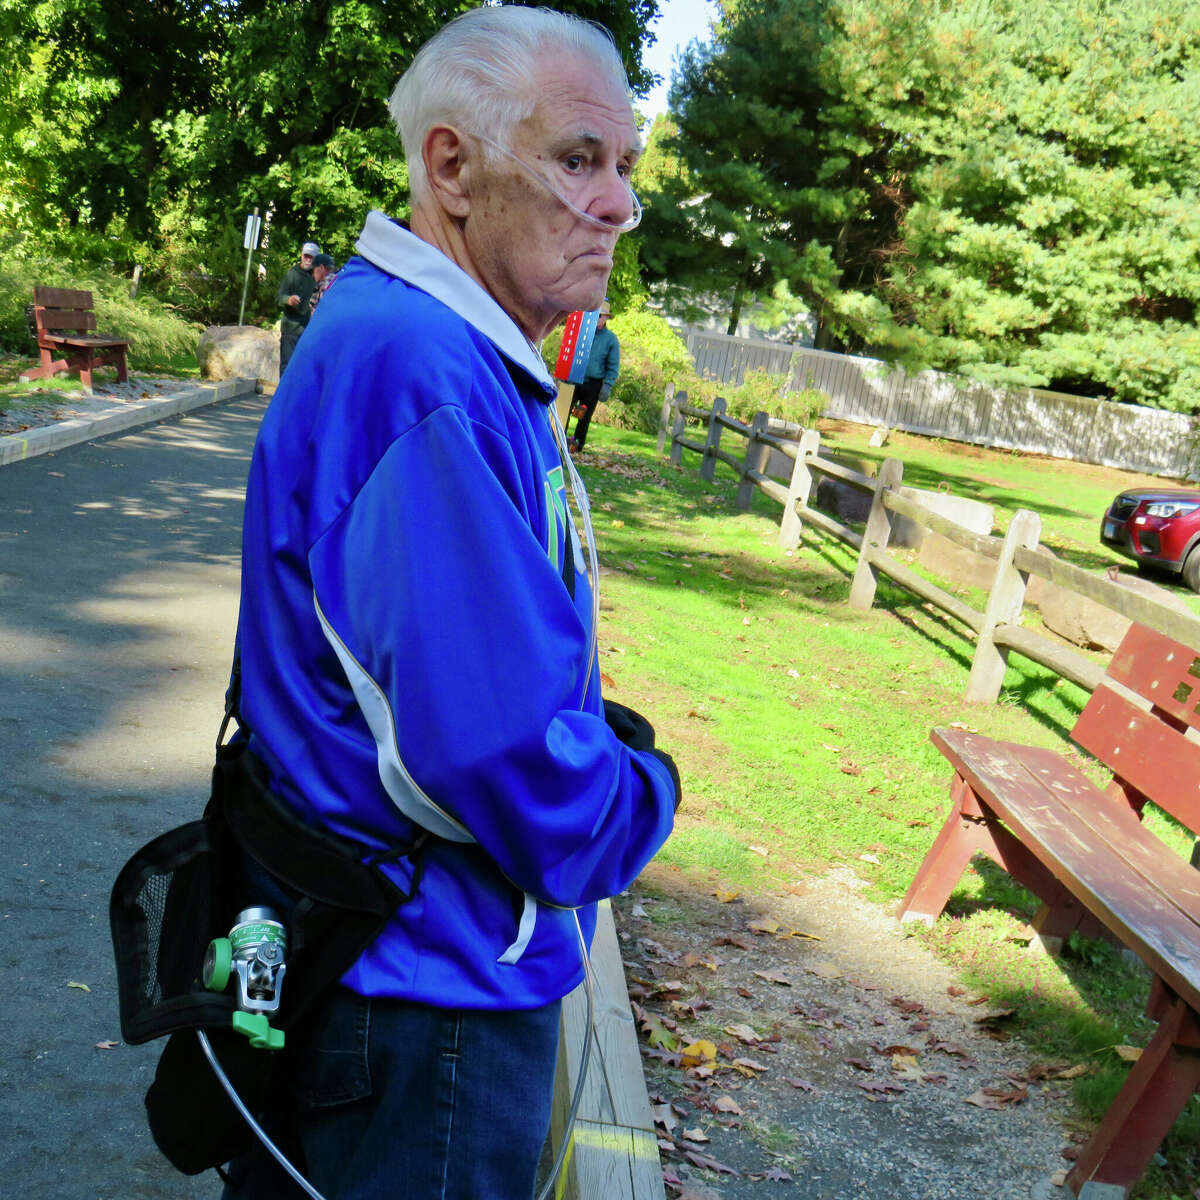 Michael Imperati, 87, with oxygen tank at recent bocce competition at Parker Memorial Park in Branford.